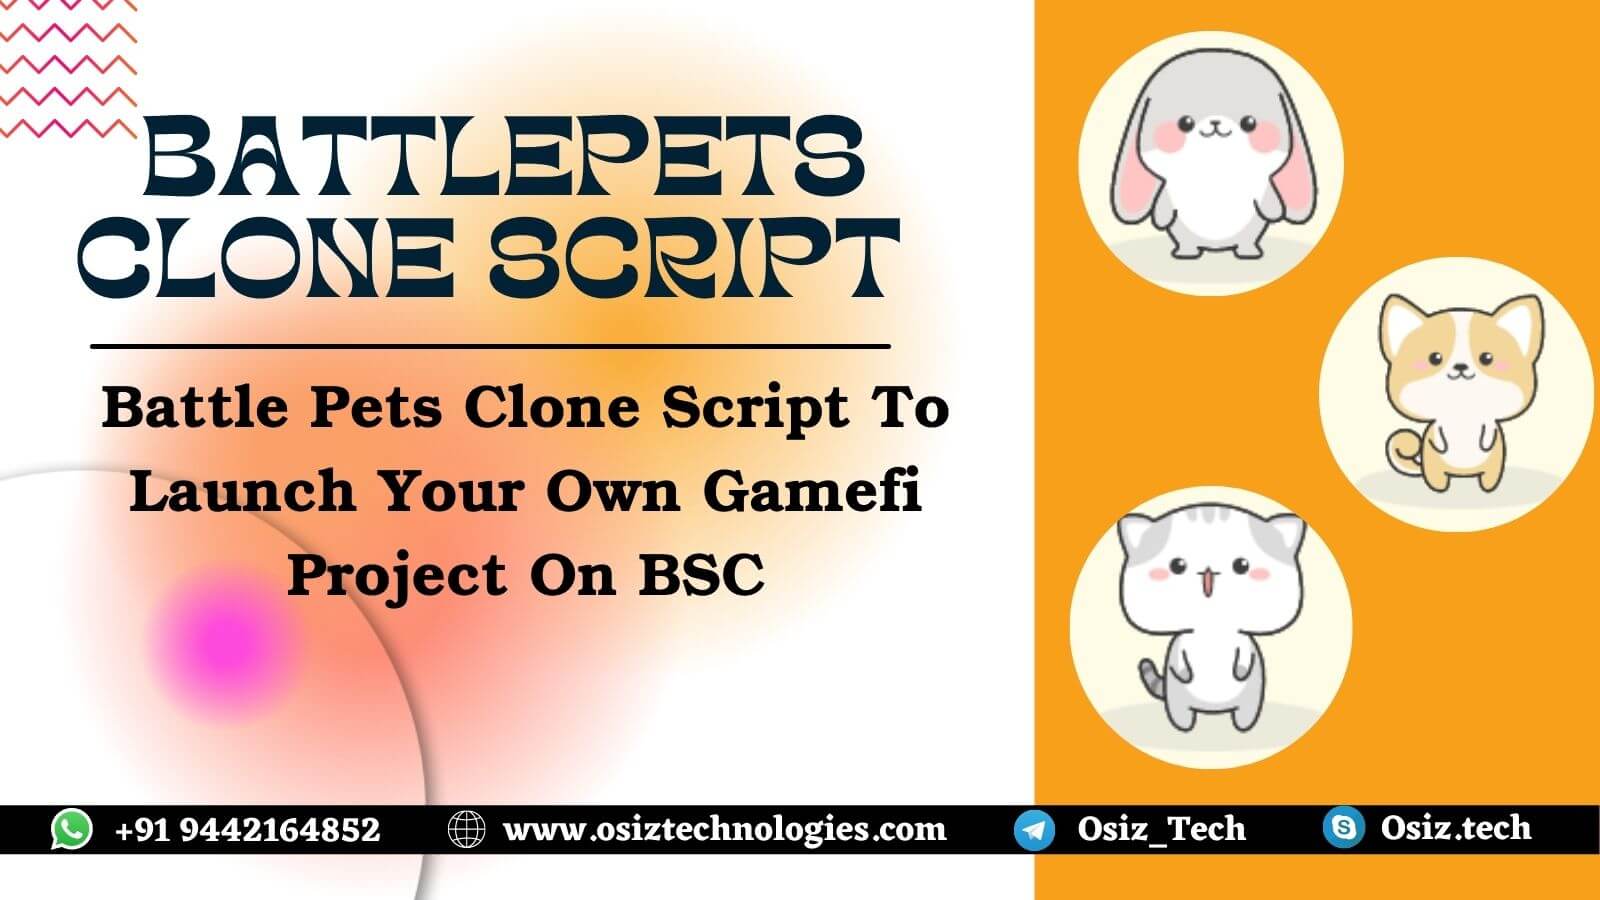 Battle Pets Clone Script To Launch Your Own Gamefi Project On BSC